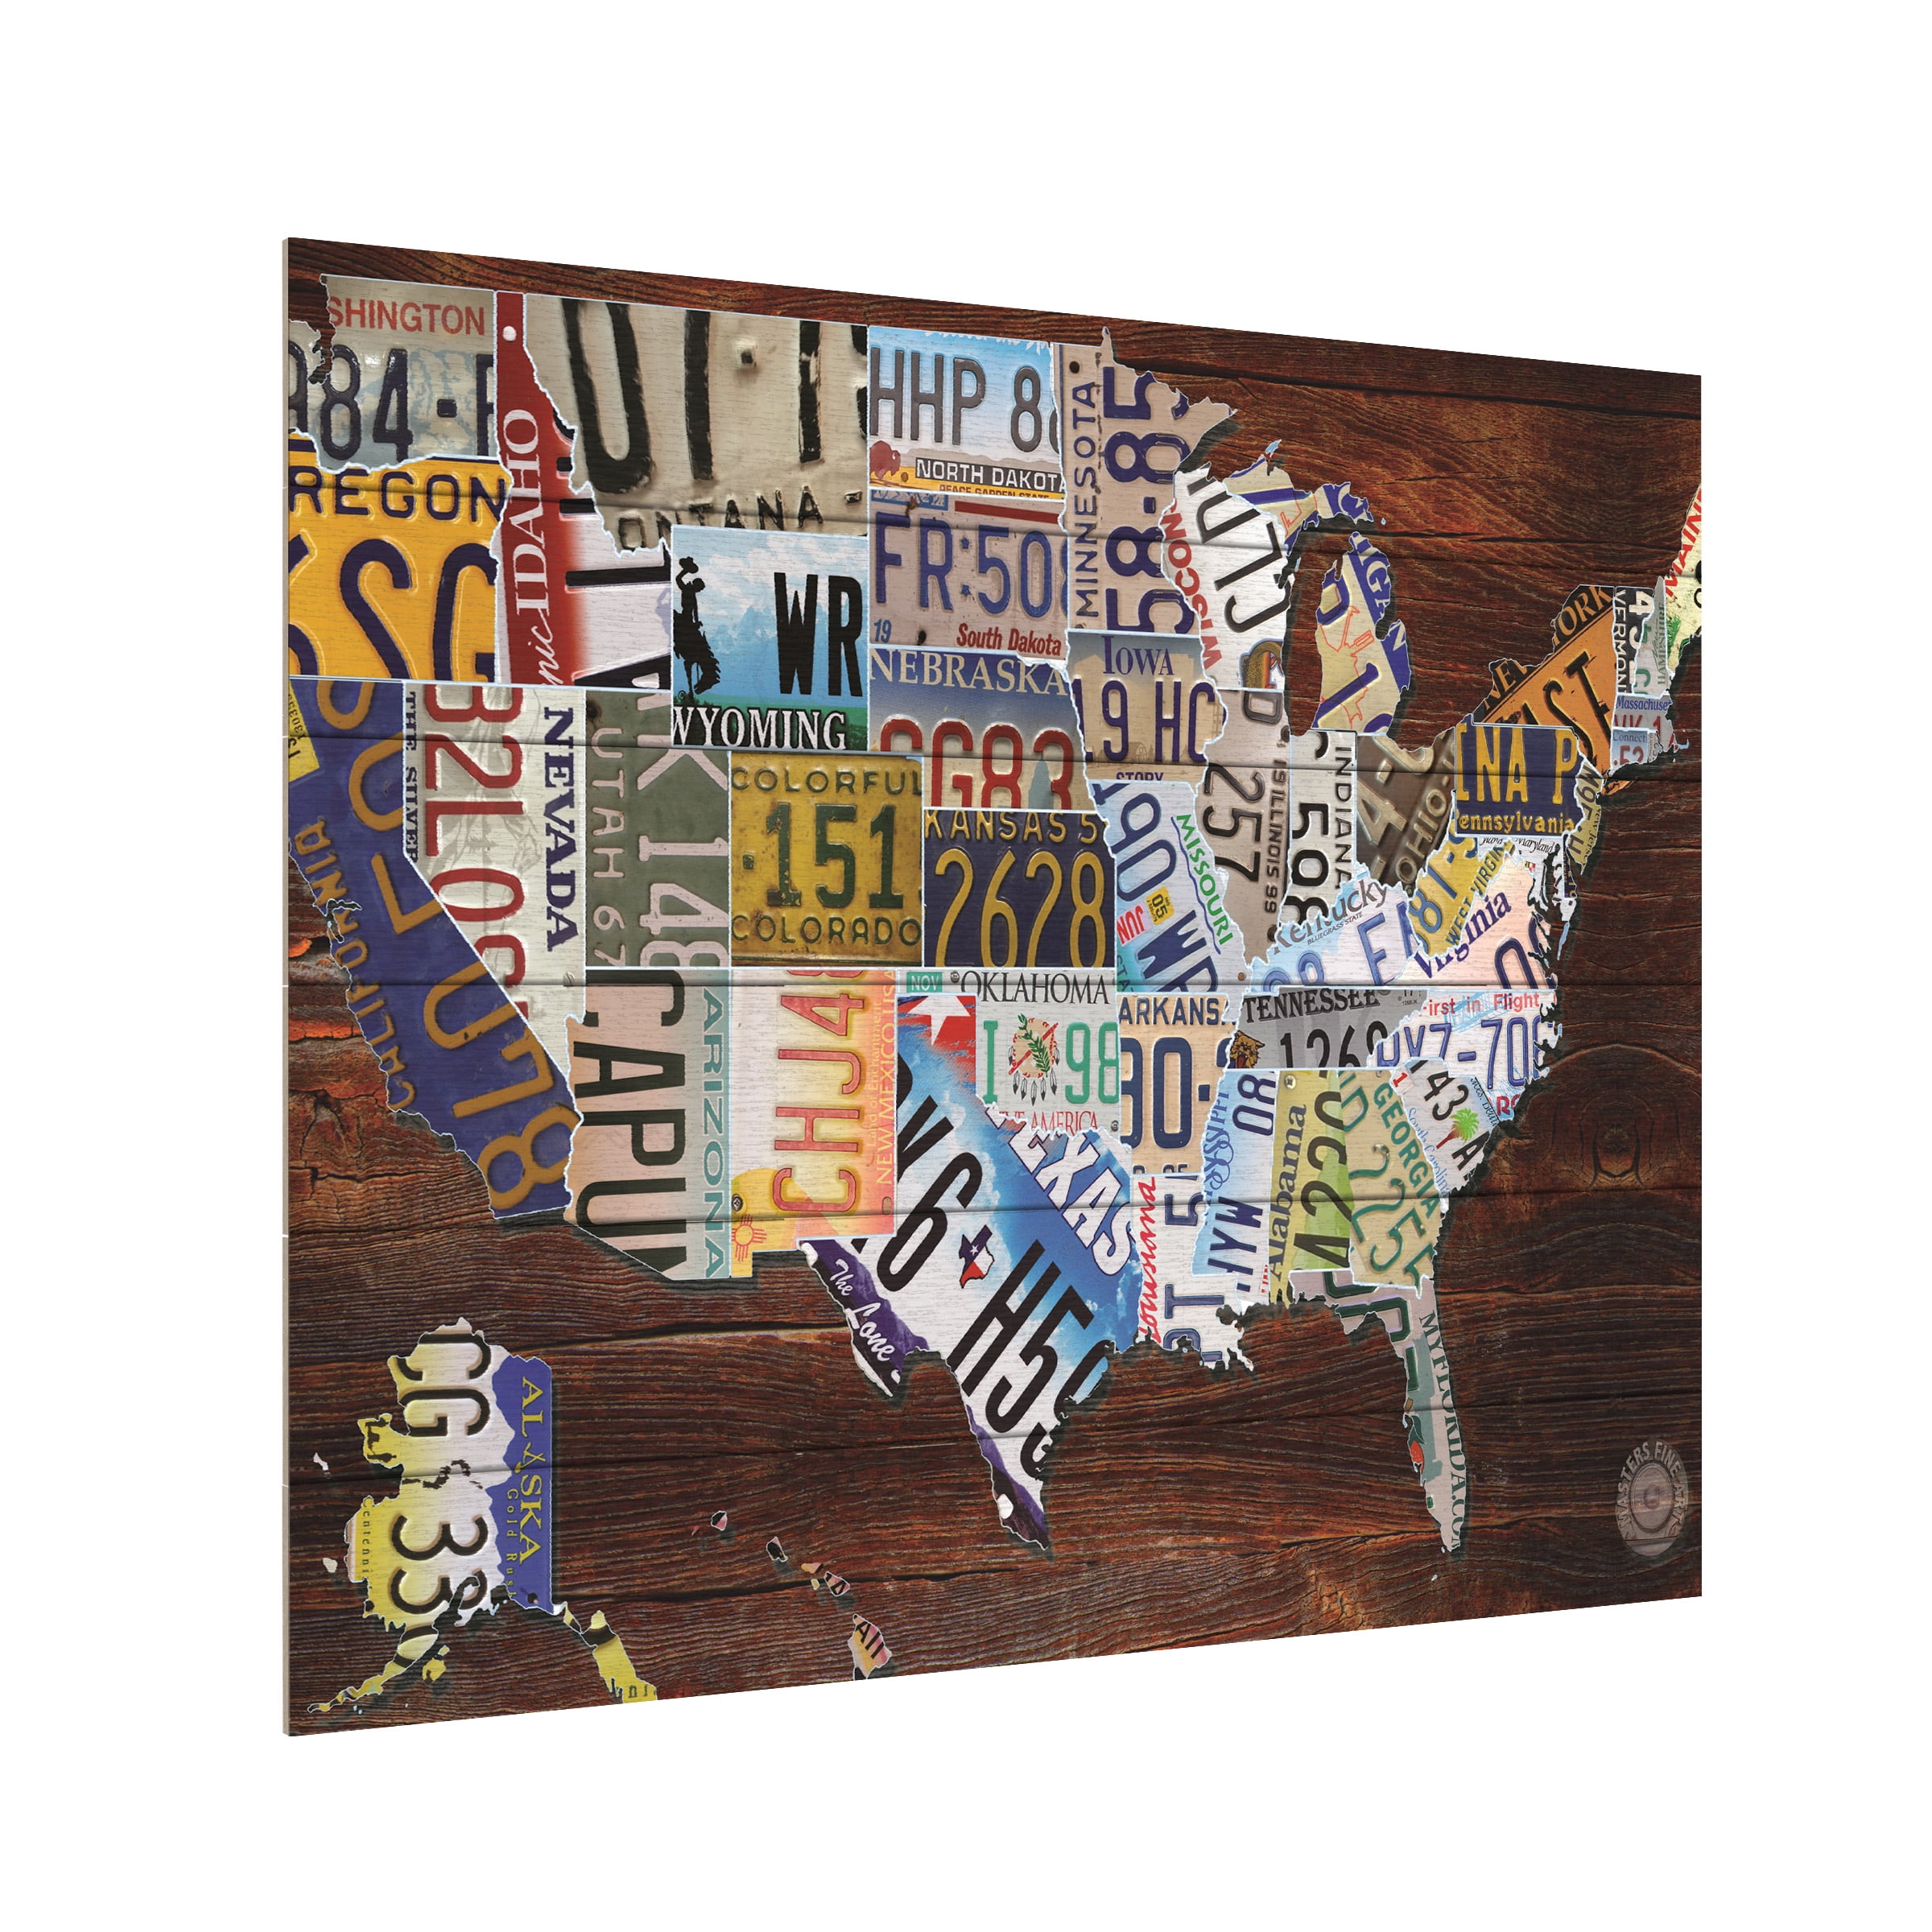 LICENSE PLATE MAP OF THE US UNITED STATES USA TRAVEL oil paintings canvas  art Prints Wall Art For Living Room Bedroom Decor - AliExpress